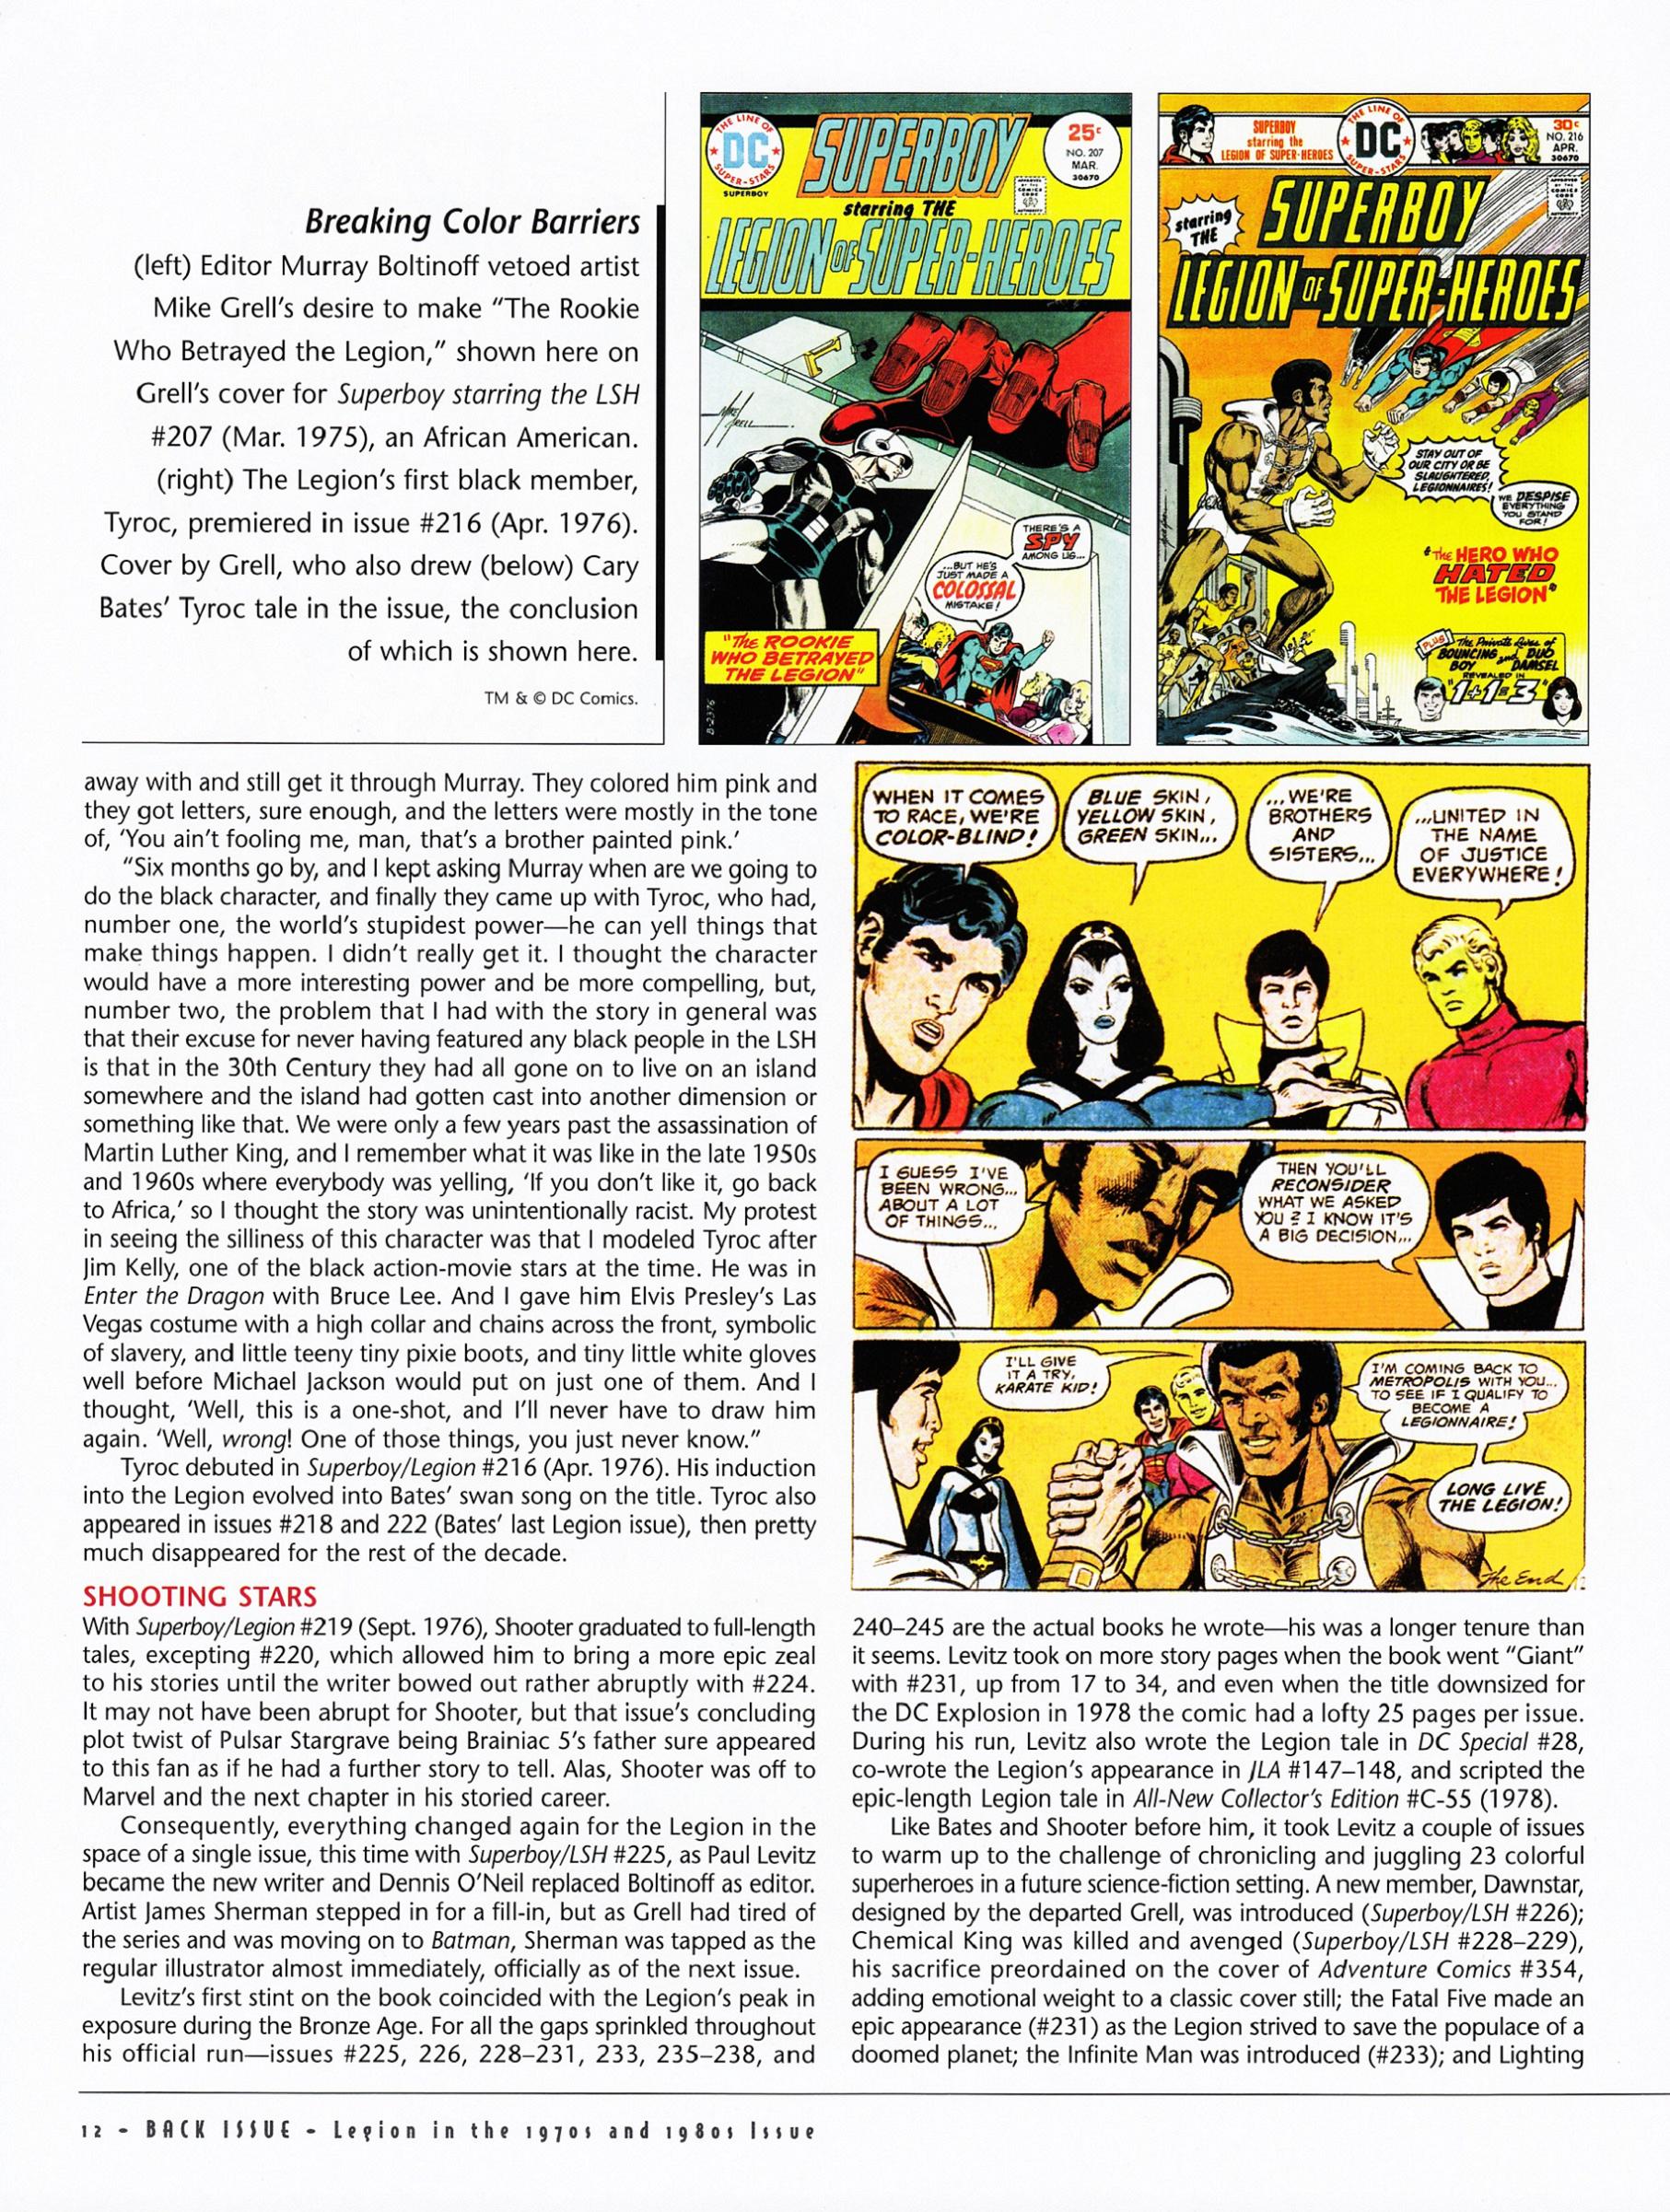 Read online Back Issue comic -  Issue #68 - 14